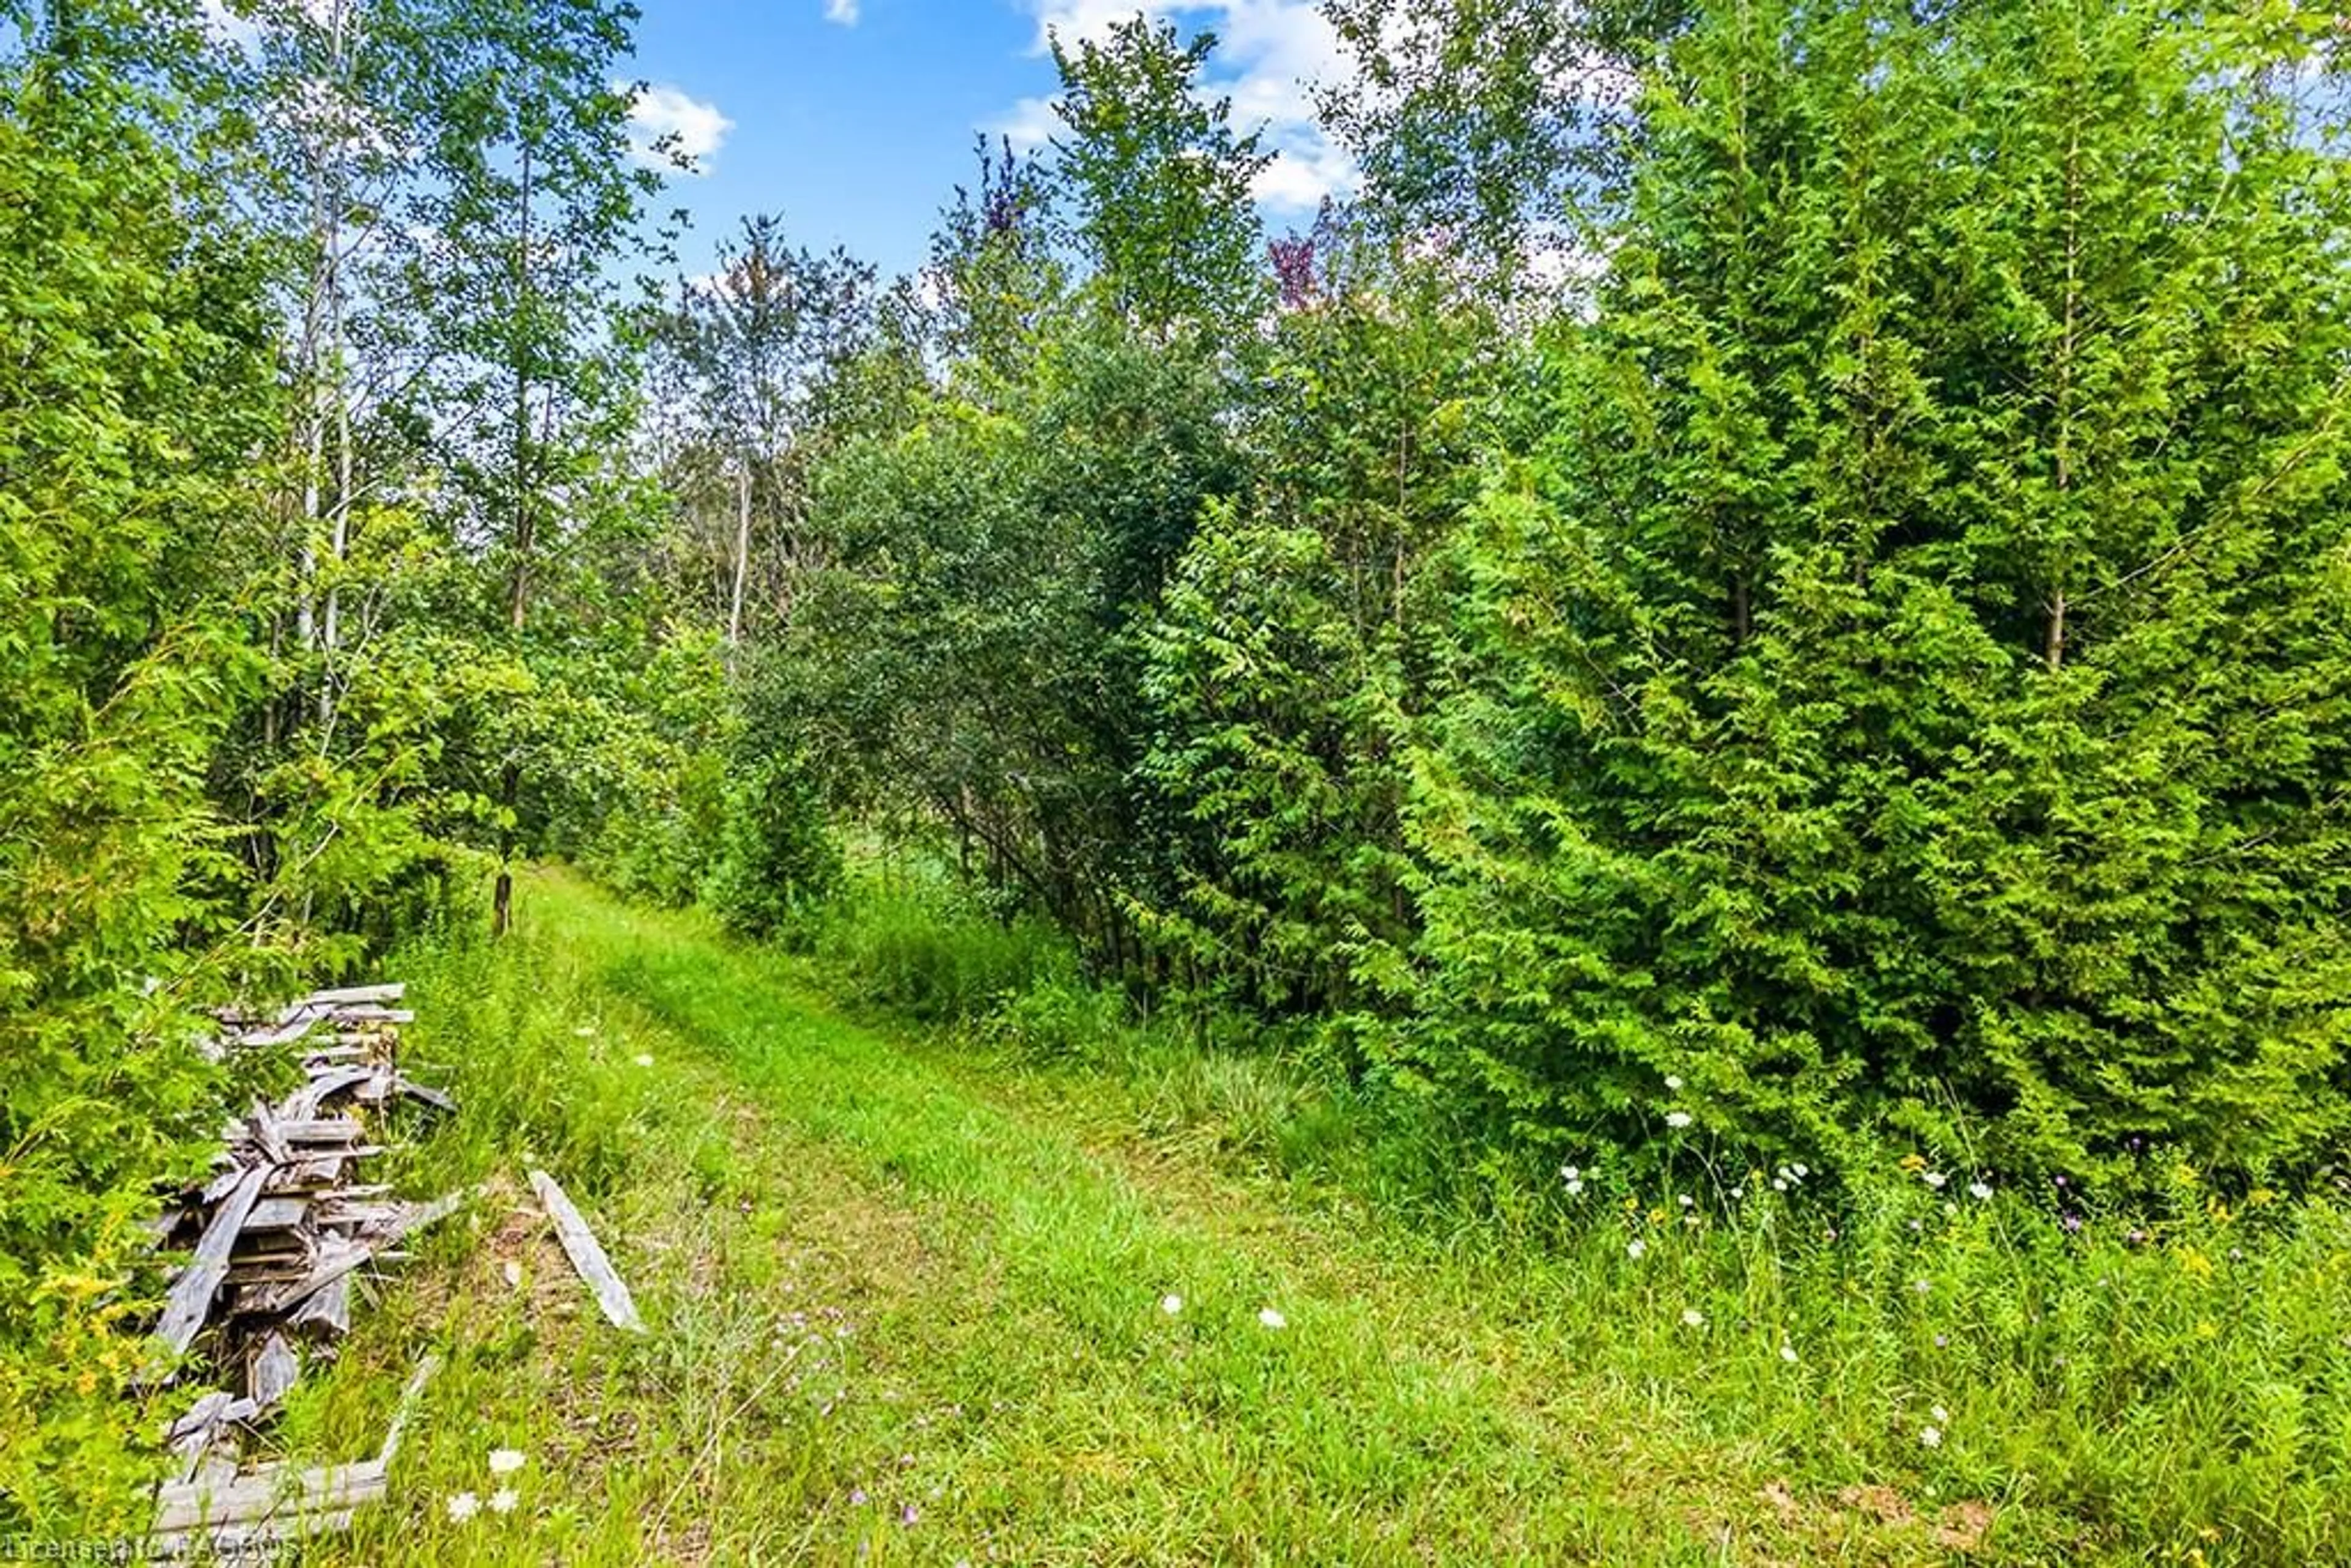 Forest view for PT LT 31 Baseline Rd, West Grey Ontario N0G 2M0